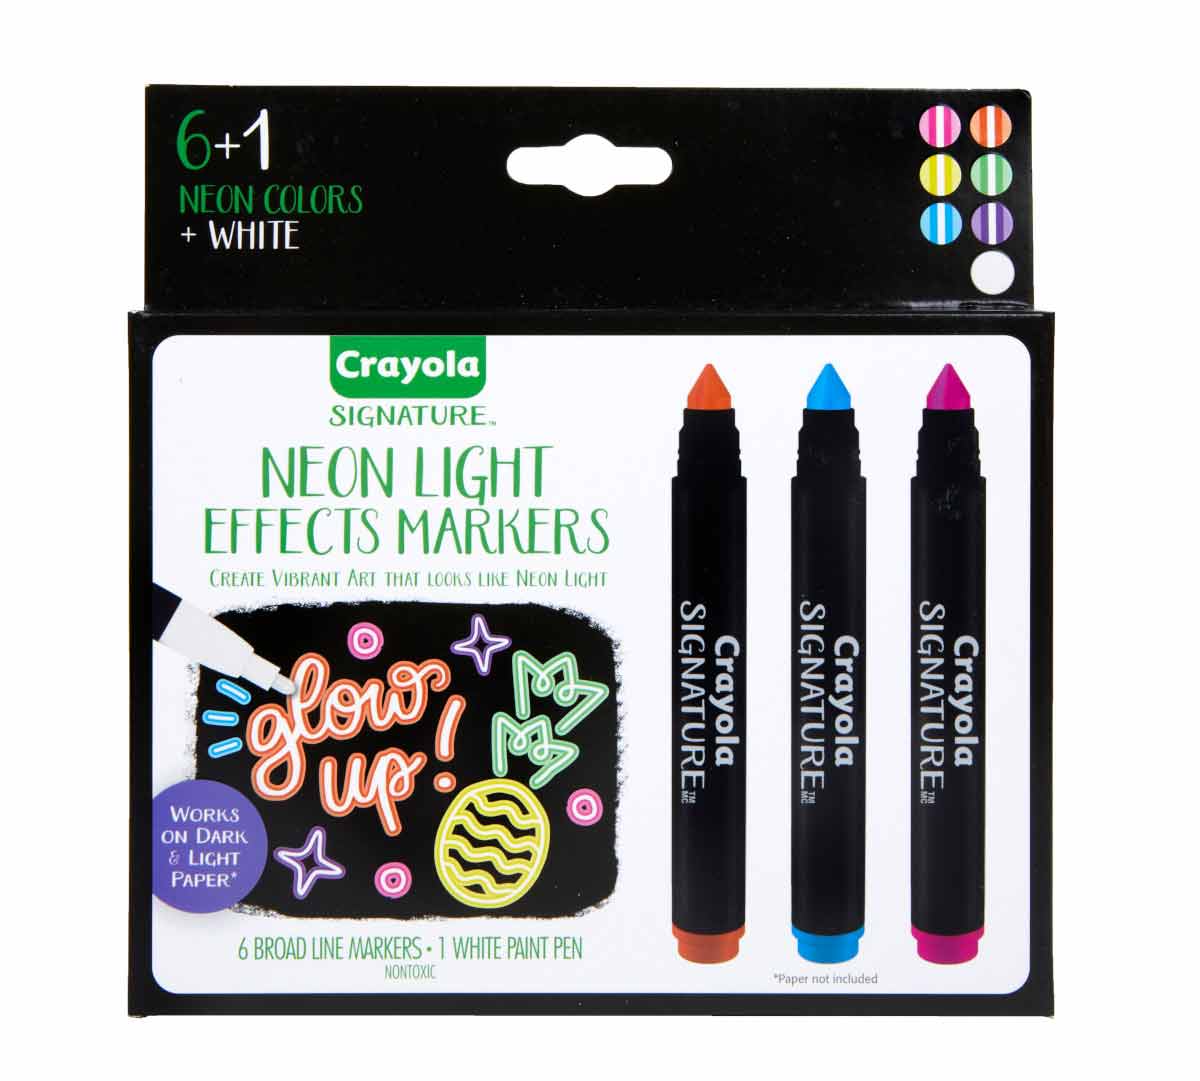 Crayola Gel FX Washable Markers Classpack Assorted Colors Box Of